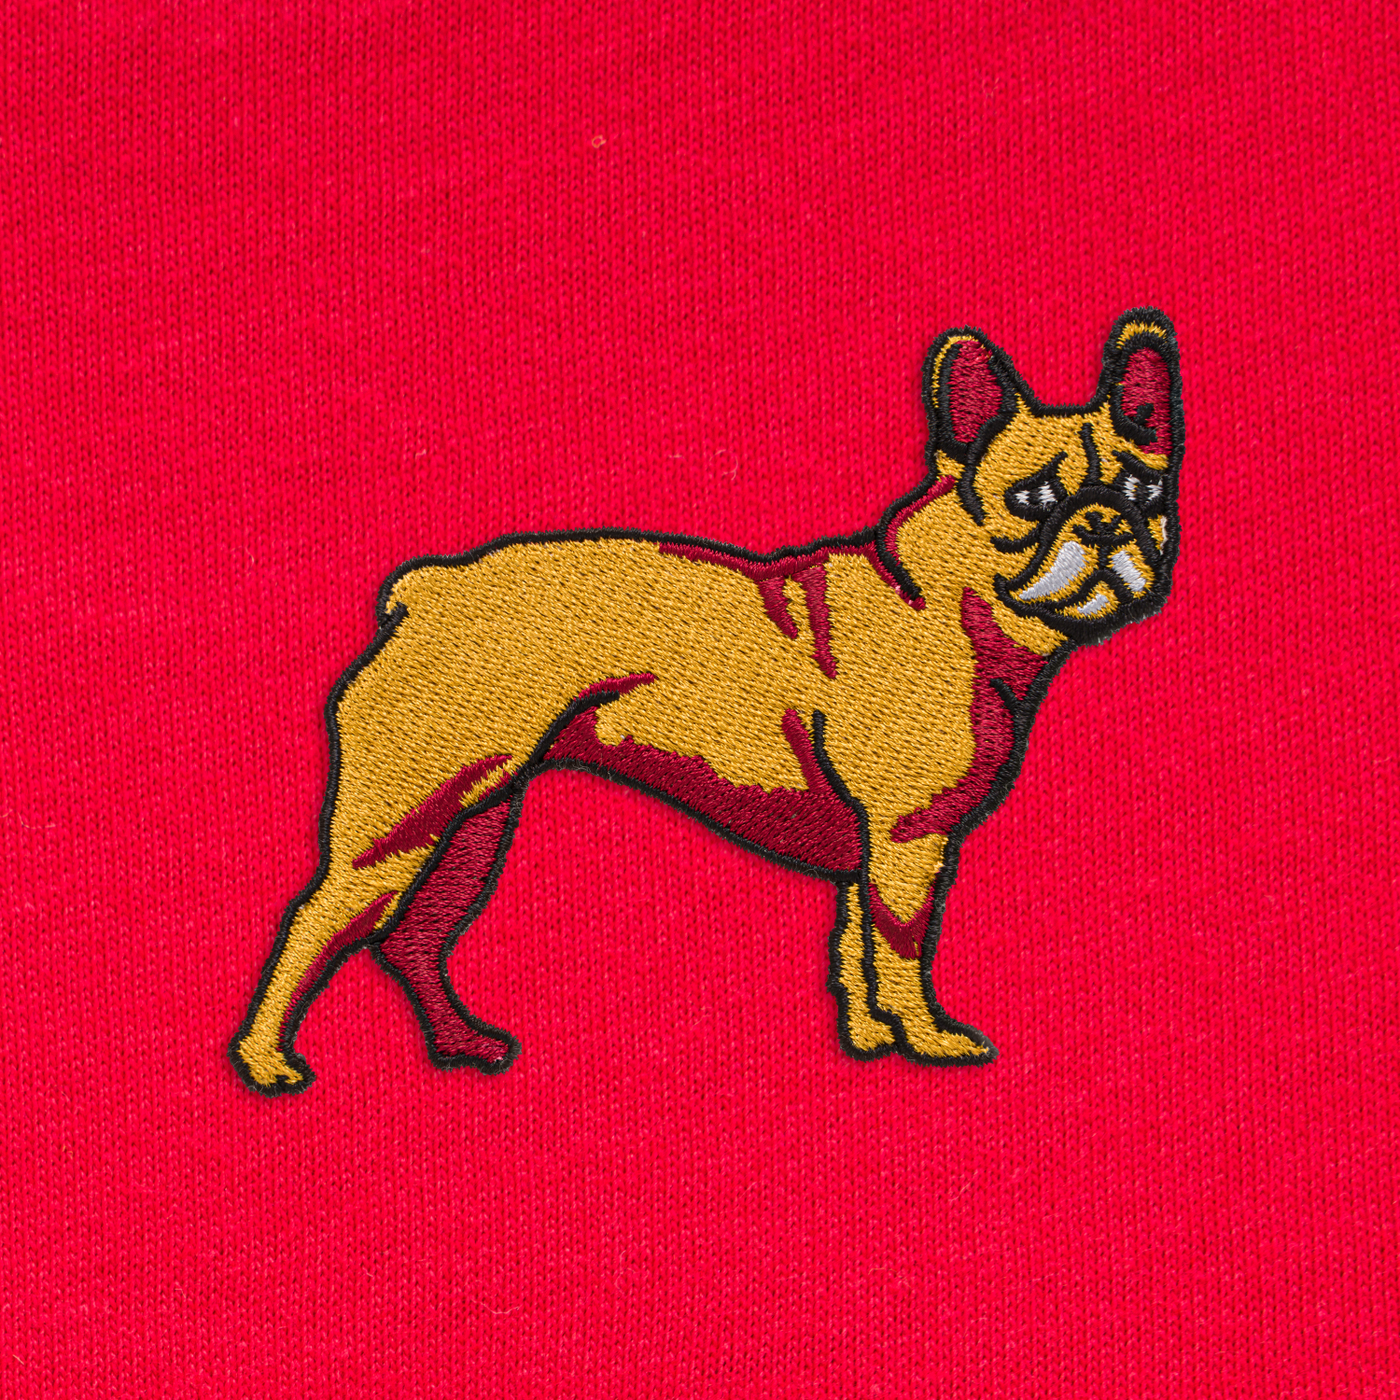 Bobby's Planet Women's Embroidered French Bulldog Long Sleeve Shirt from Paws Dog Cat Animals Collection in Red Color#color_red